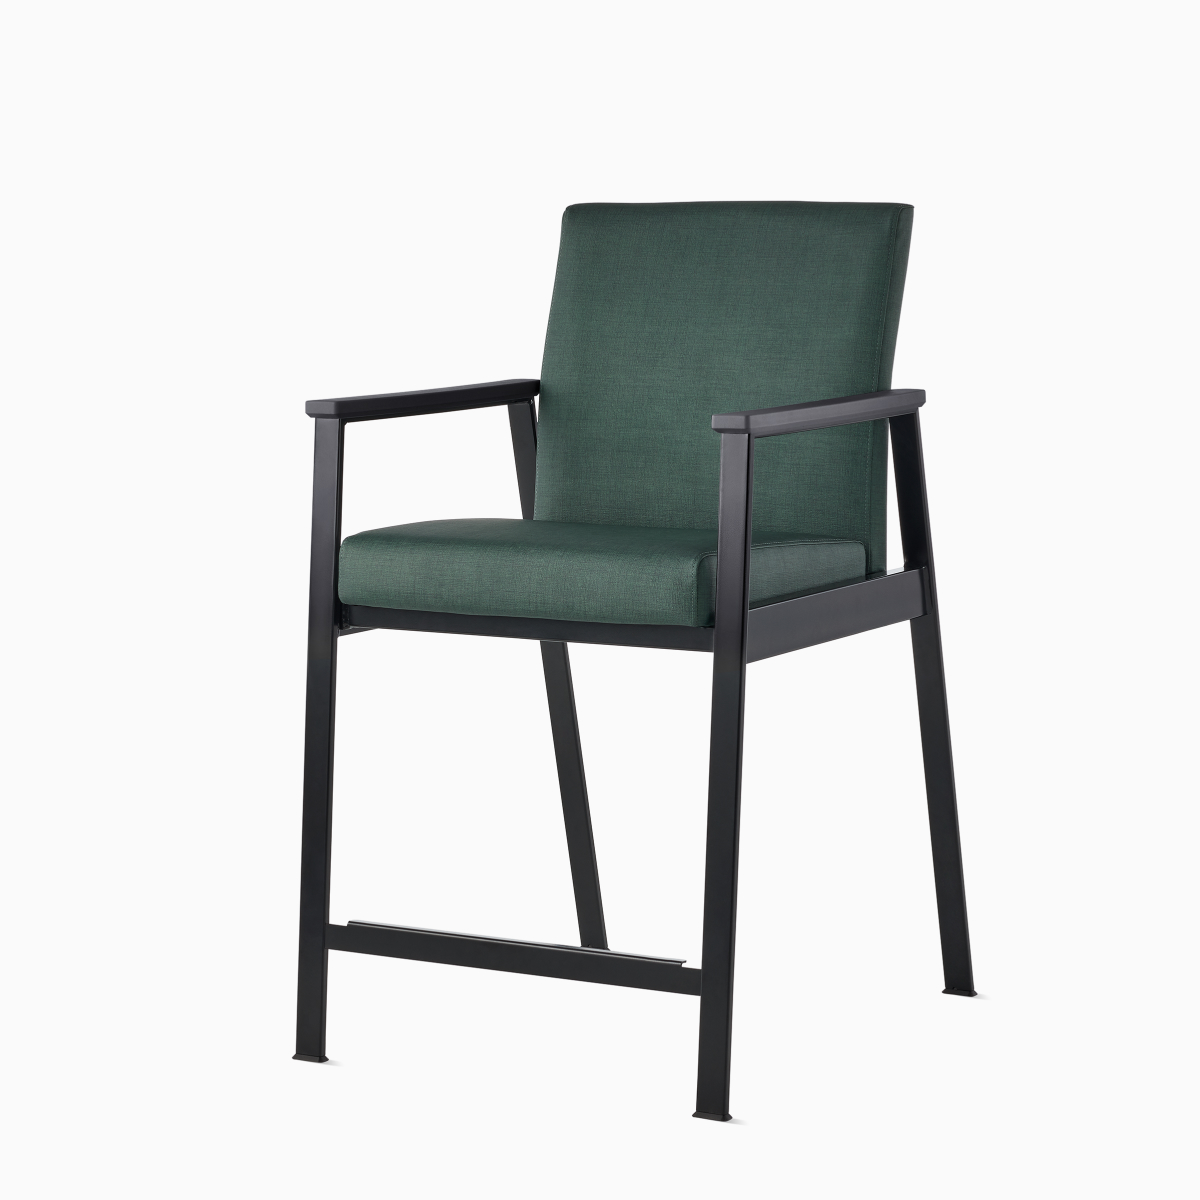 Front-angle view of an Easton Easy Access Chair with green upholstery, black four-leg base, and black arm caps.